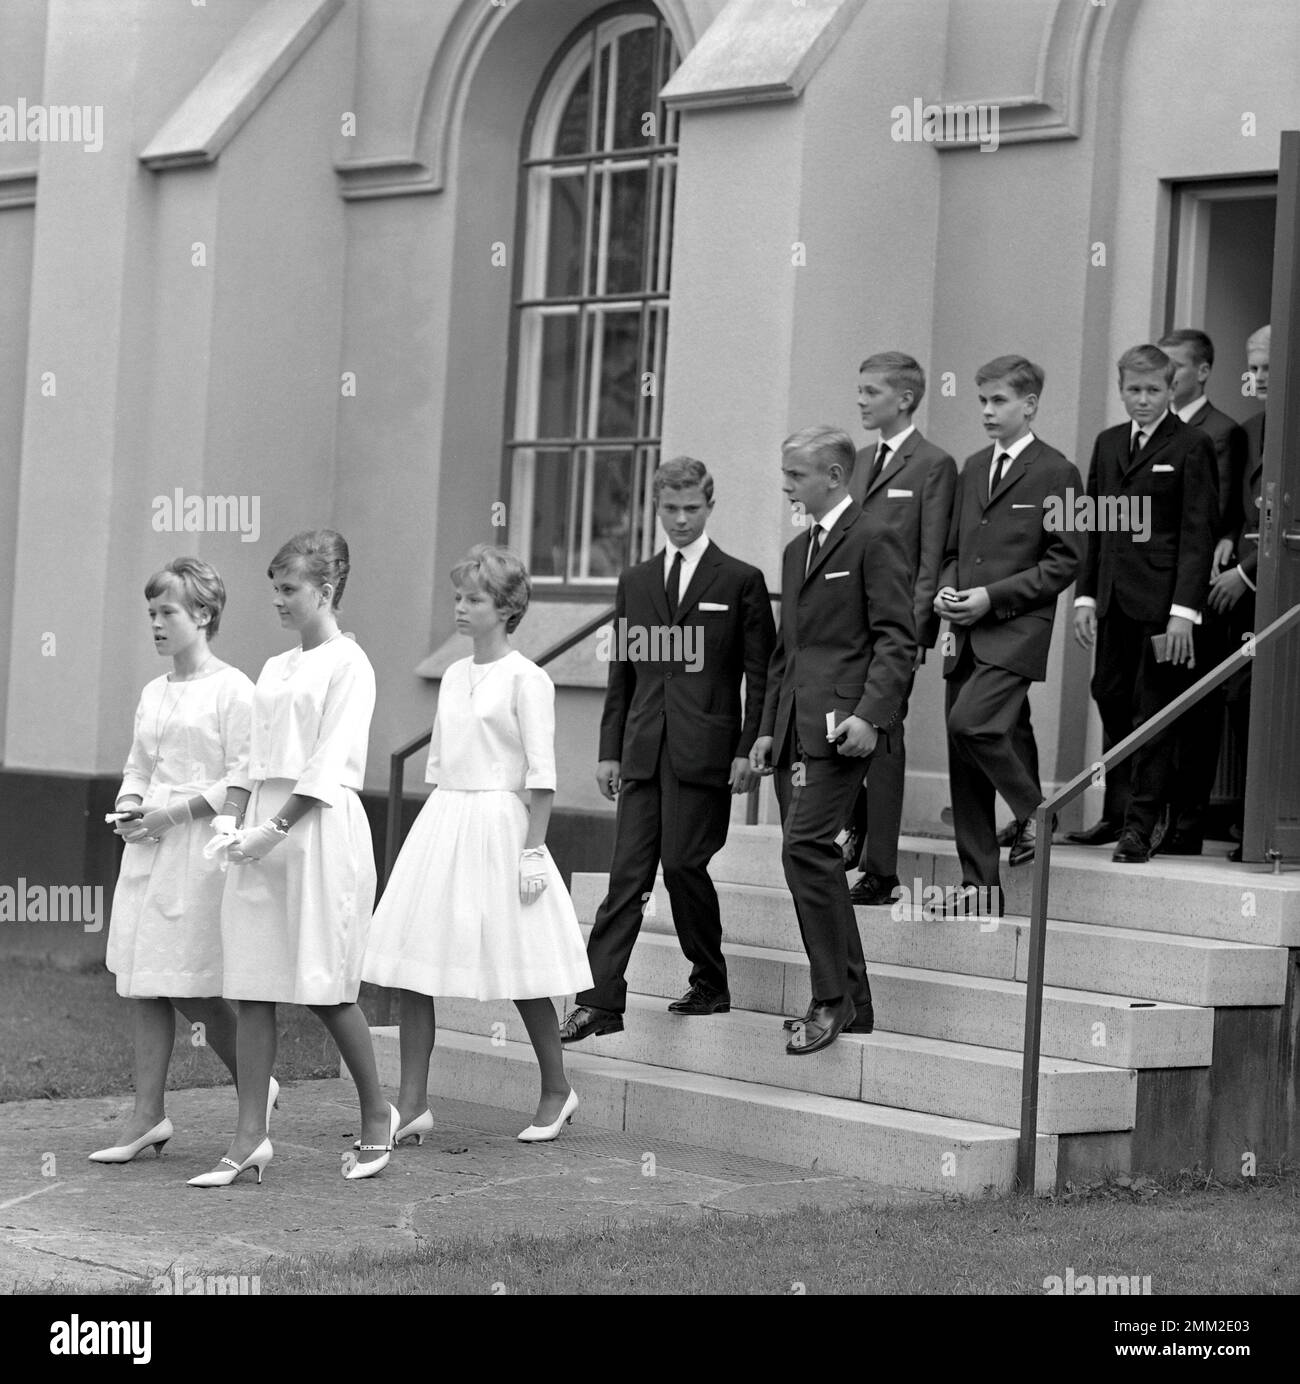 Carl XVI Gustaf, King of Sweden. Born 30 april 1946. Picture taken in connection with his confirmation 21 july 1962 at Borgholms church on the island of Öland. Stock Photo